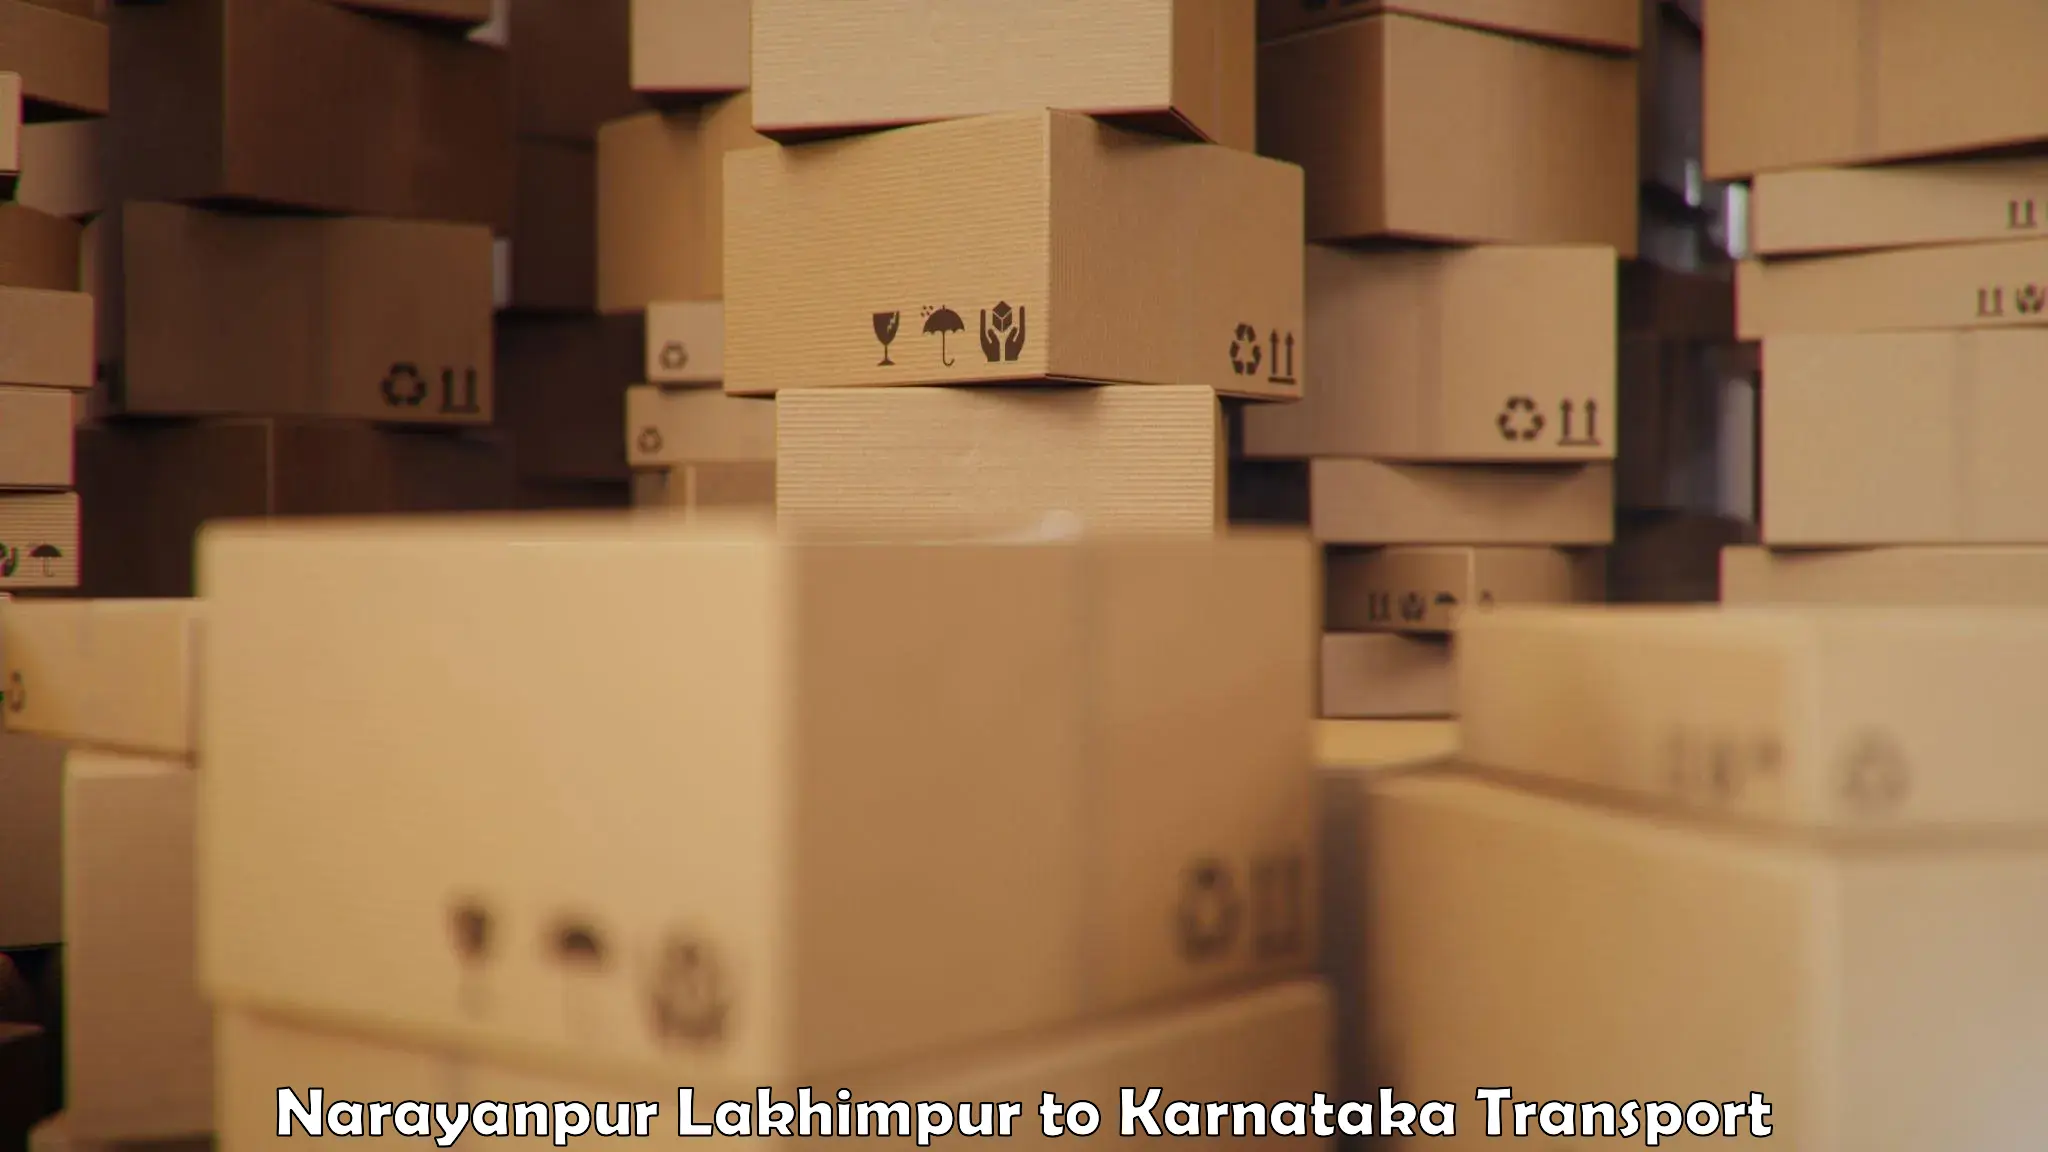 Cargo train transport services in Narayanpur Lakhimpur to Chikmagalur